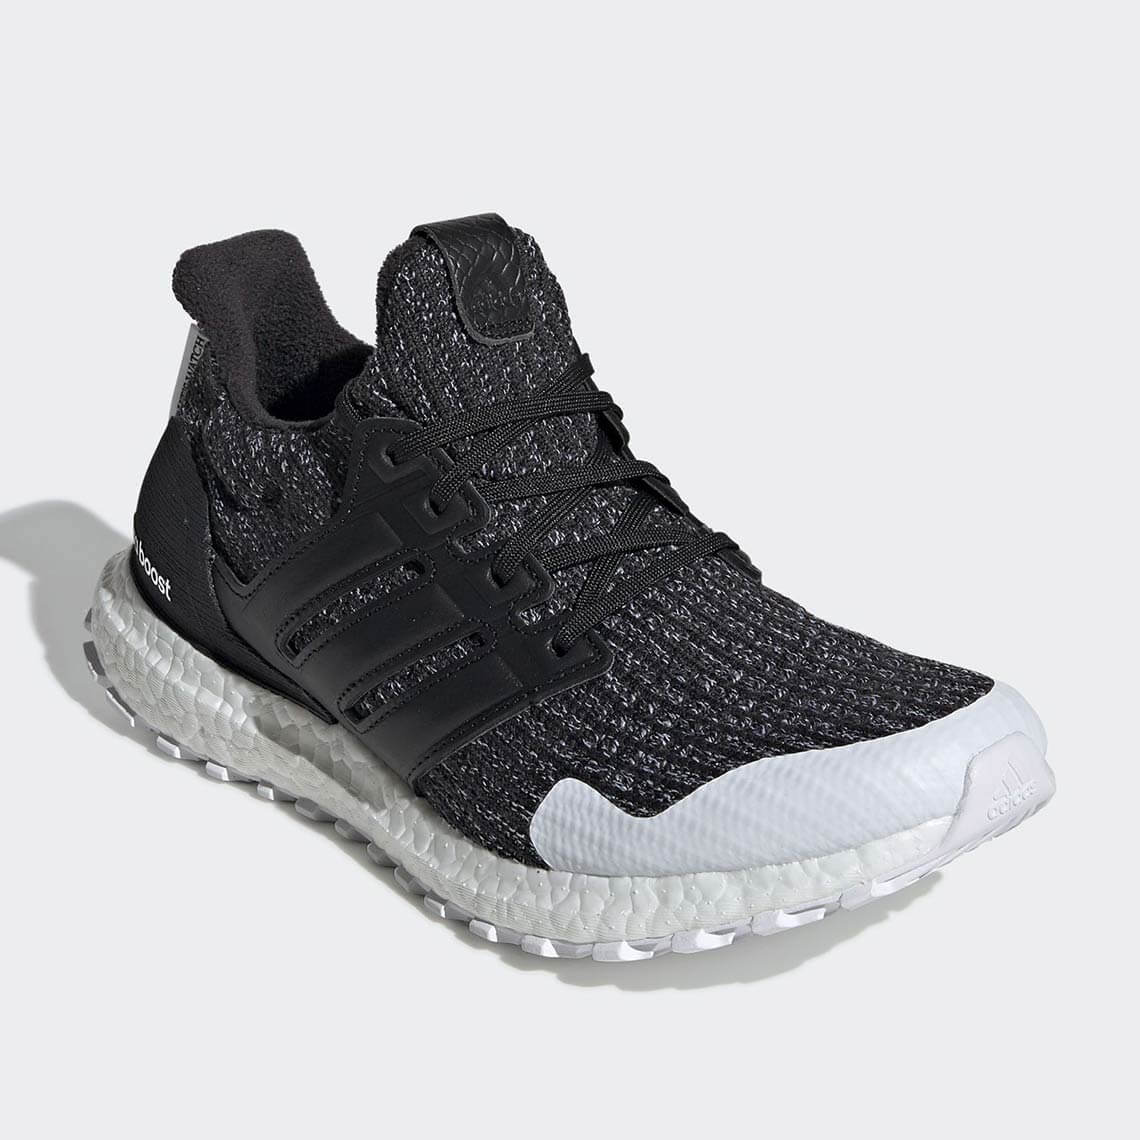 game of thrones adidas ultra boost nights watch EE3707 5